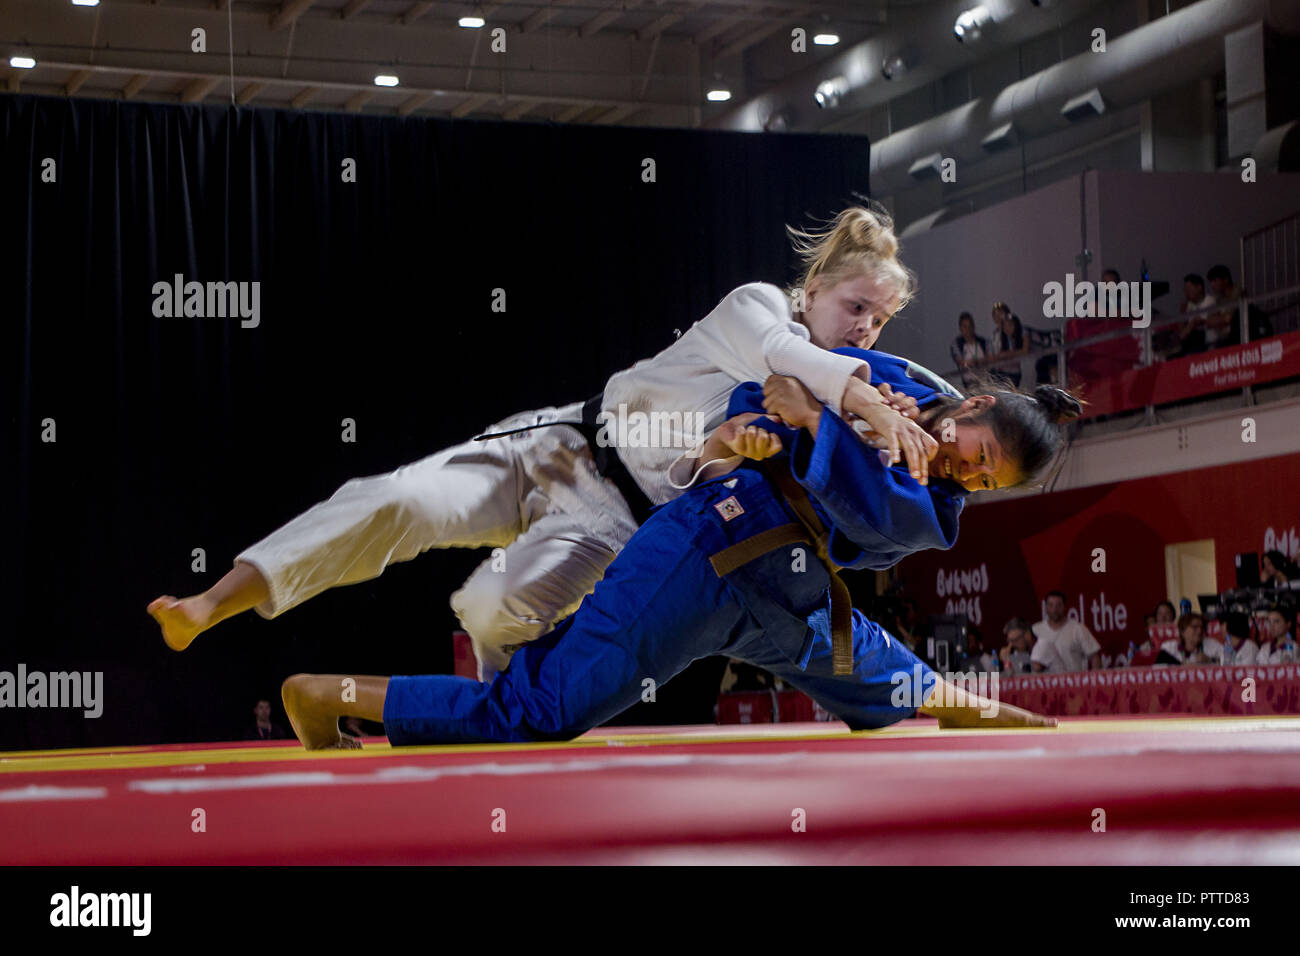 Buenos Aires, Buenos Aires, Argentina. 10th Oct, 2018. Finals of mixed teams of international judo. The Mexican Pecha Itzel (Blue), member of the team Beijing, winner of the gold medal, faces the Athens team fighter, winner of the silver medal, the Dutch Visser Marin Credit: Roberto Almeida Aveledo/ZUMA Wire/Alamy Live News Stock Photo